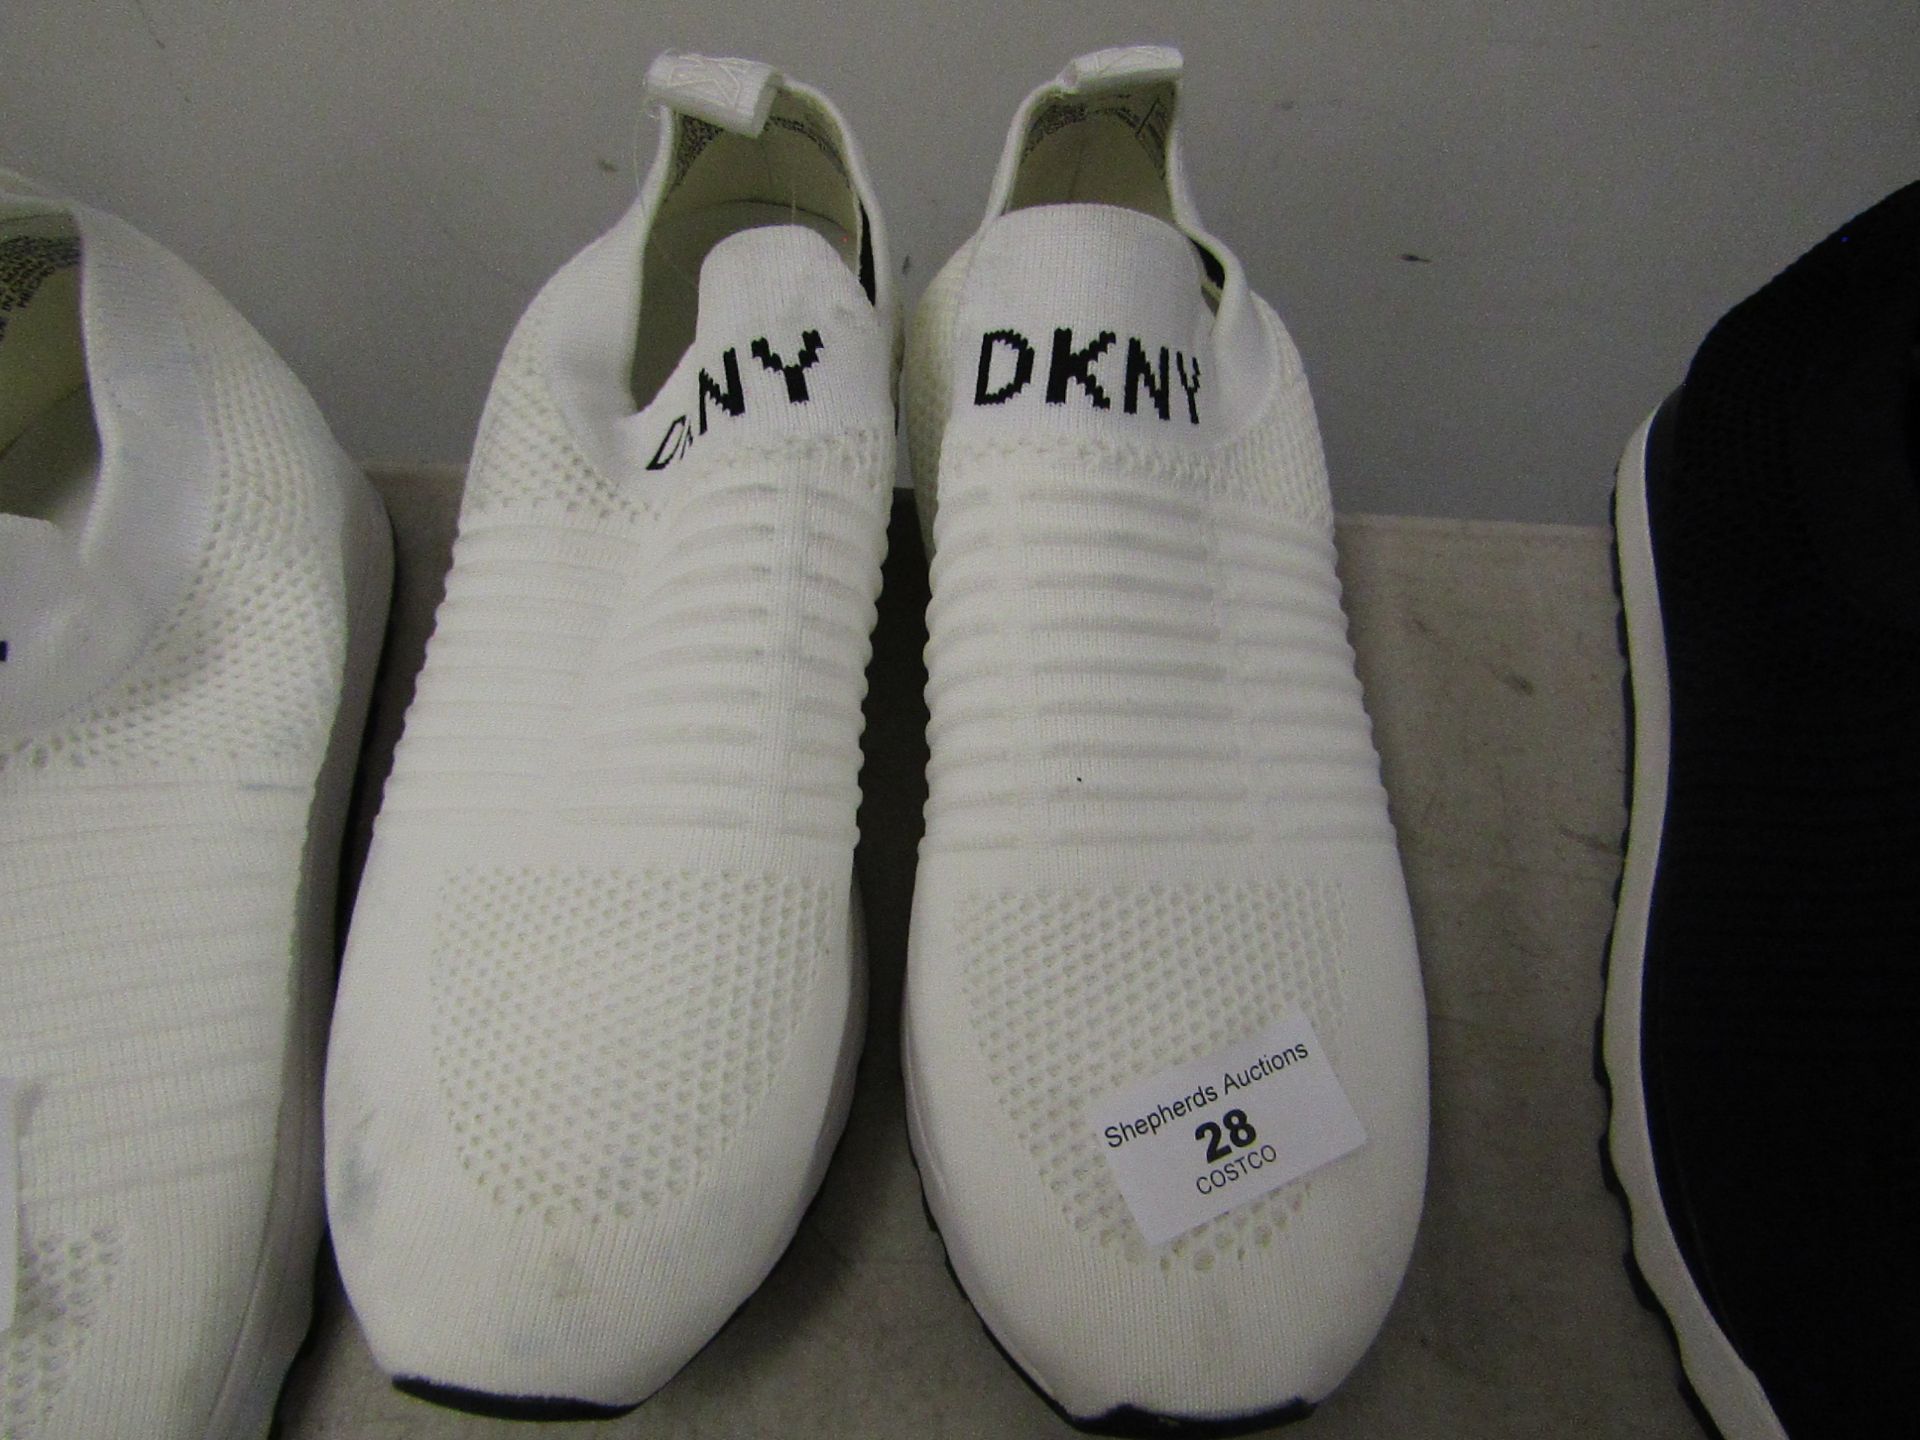 DKNY Size 5 Slip on Shoes. These Look unworn but will need a wipe